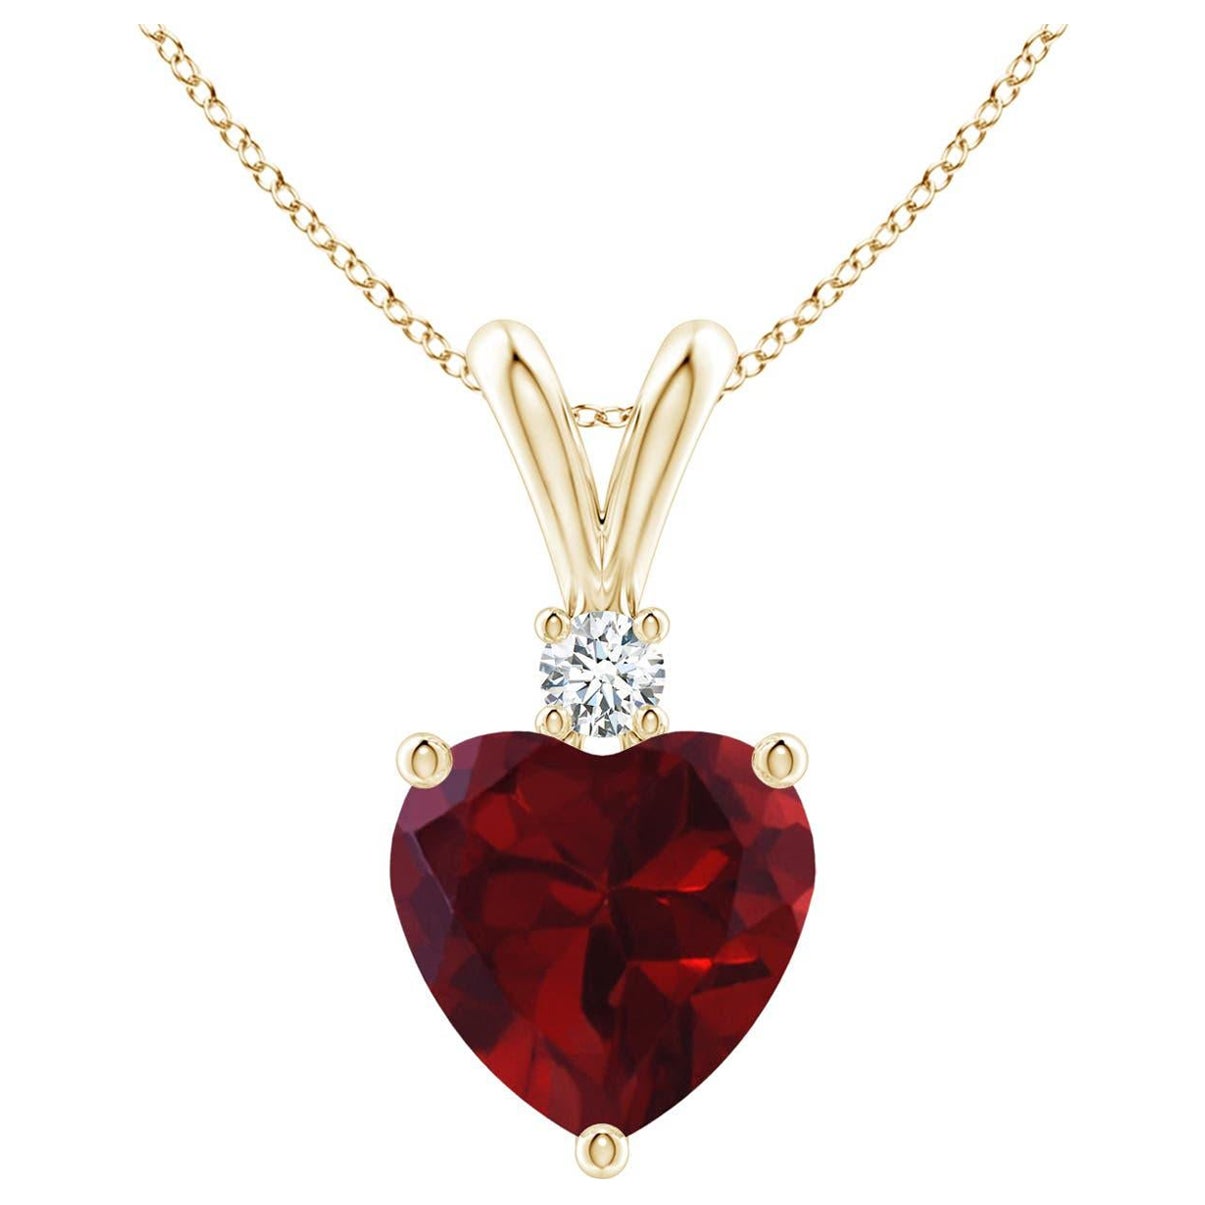 Natural Heart-Shaped 1.4ct Garnet Pendant with Diamond in 14ct Yellow Gold